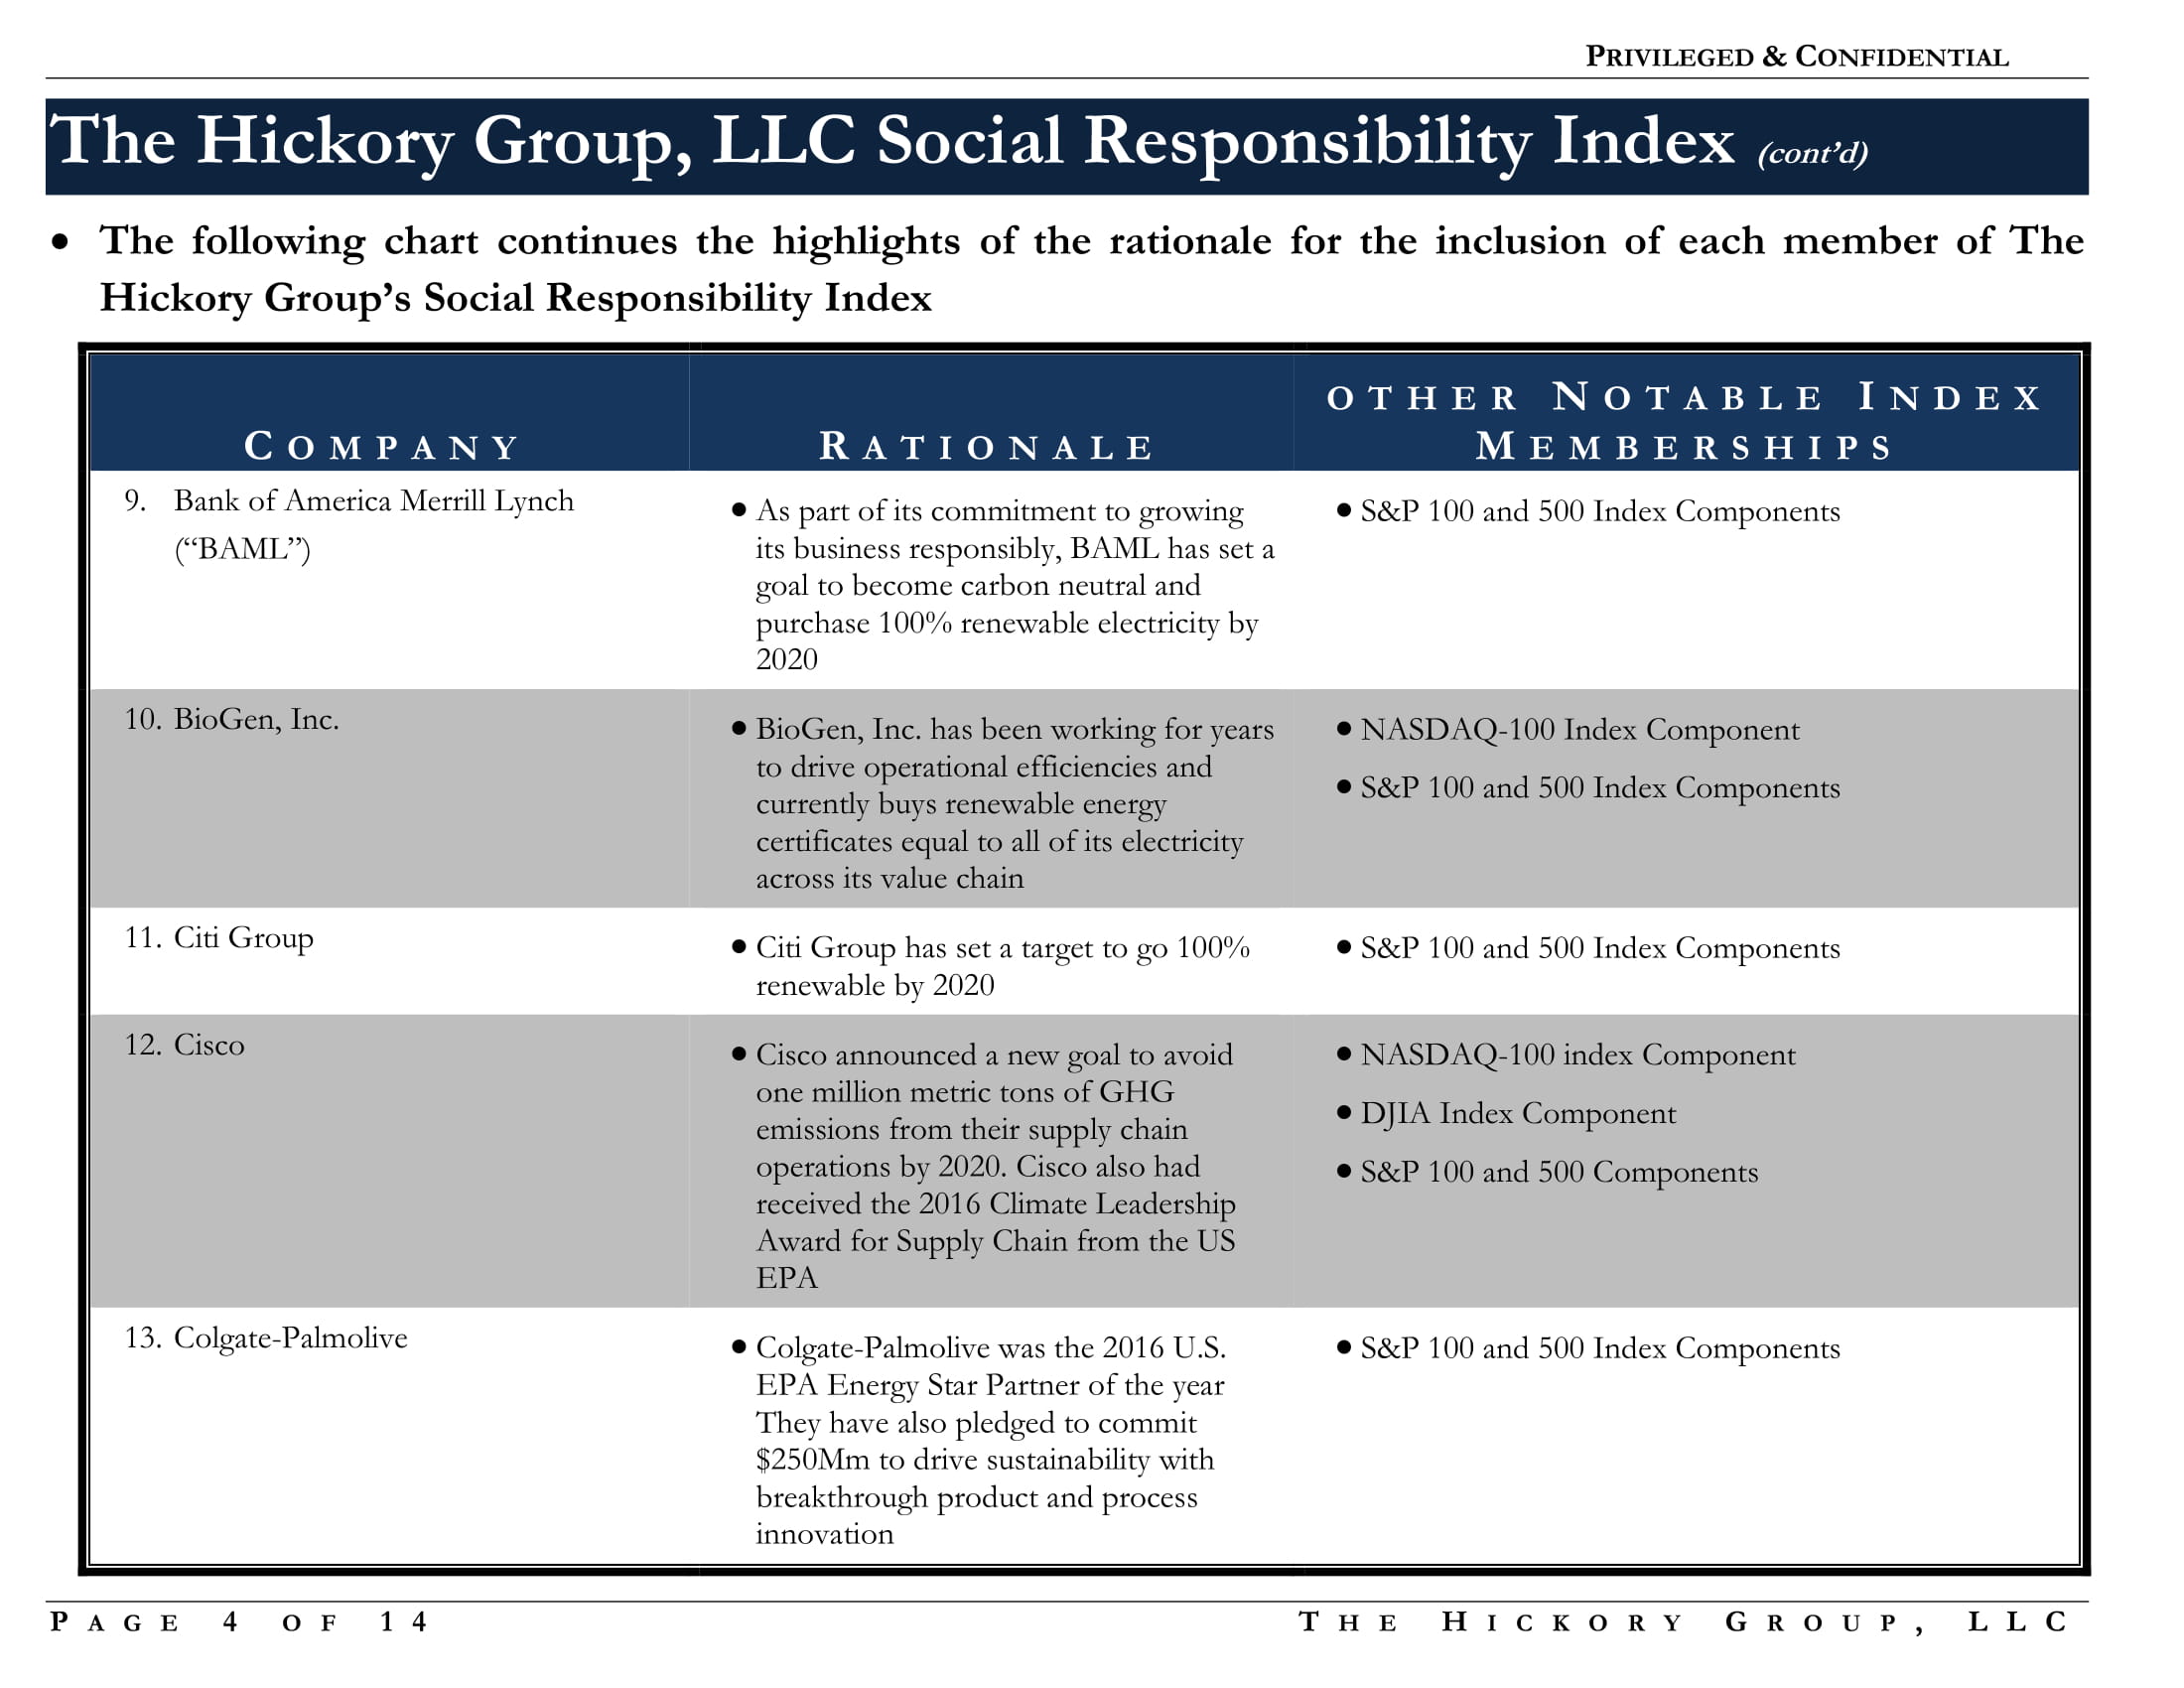 FINAL Social Responsibility Index  Notes and Rationale (7 October 2017) Privileged and Confidential-04.jpg